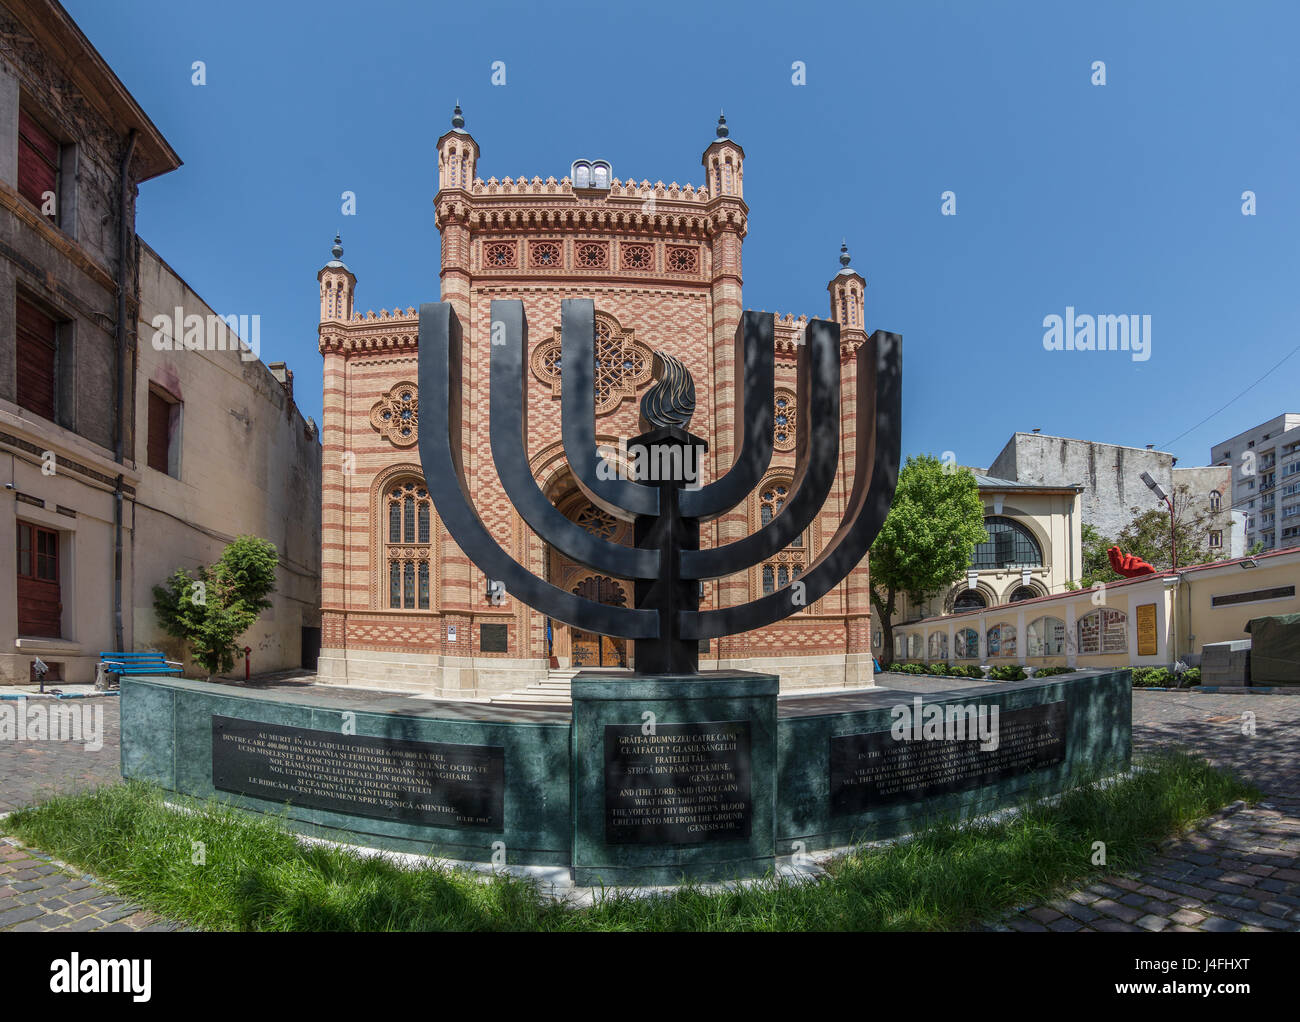 Stock Photo - The Choral Temple is a beautiful 19th century synagogue in Bucharest, Romania Stock Photo